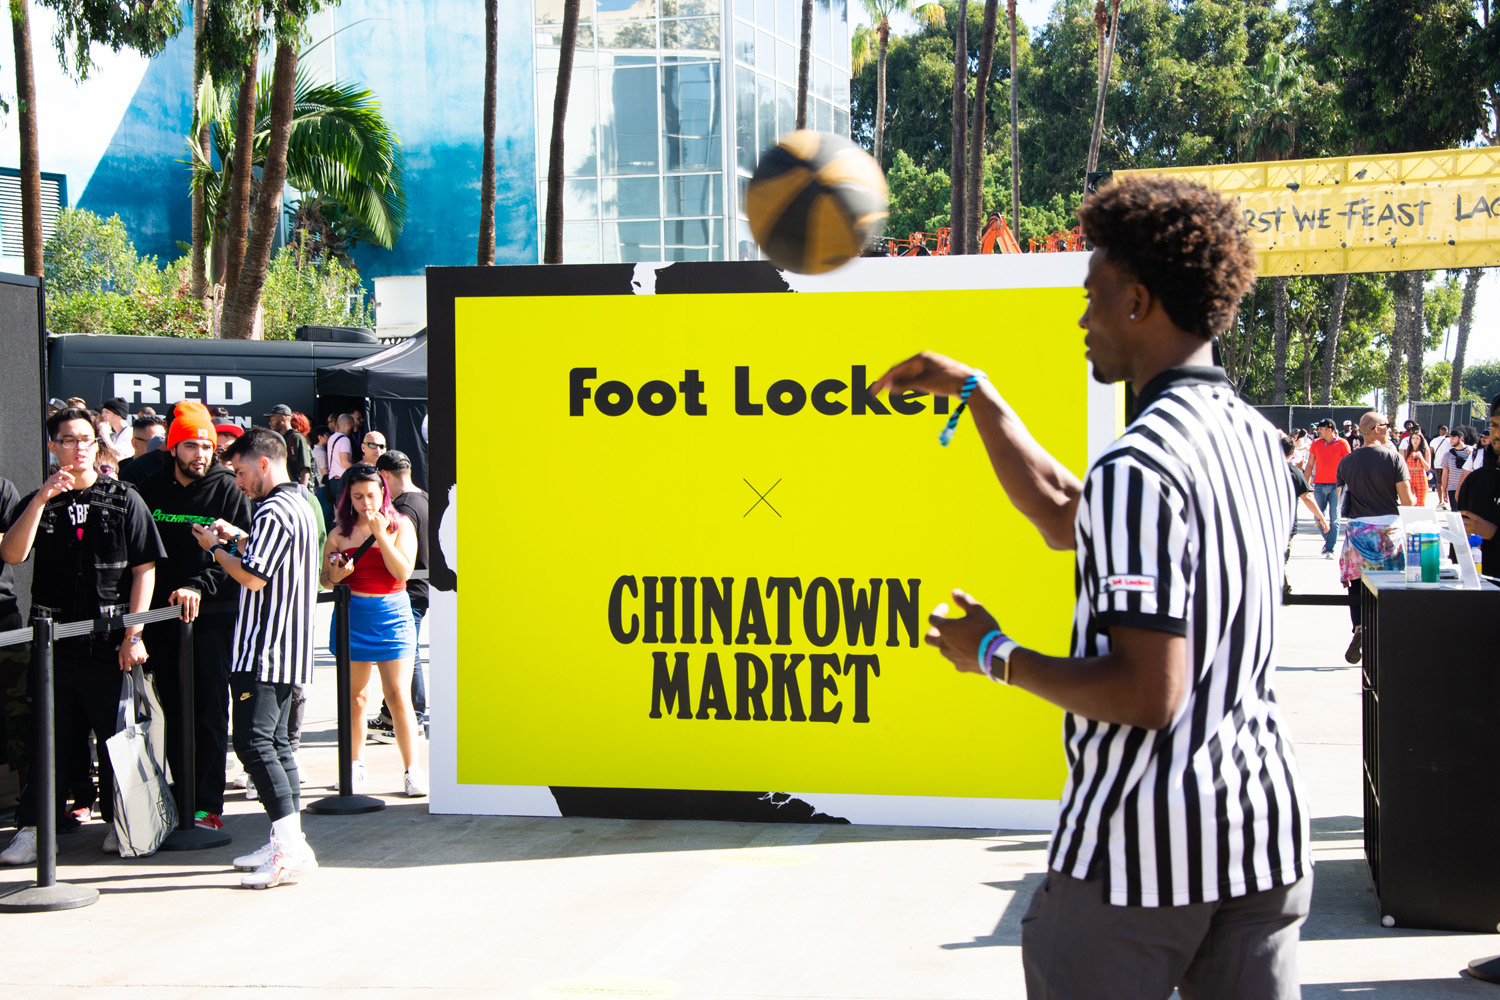 Activation Build Backboard at ComplexCon for Chinatown Market in LA